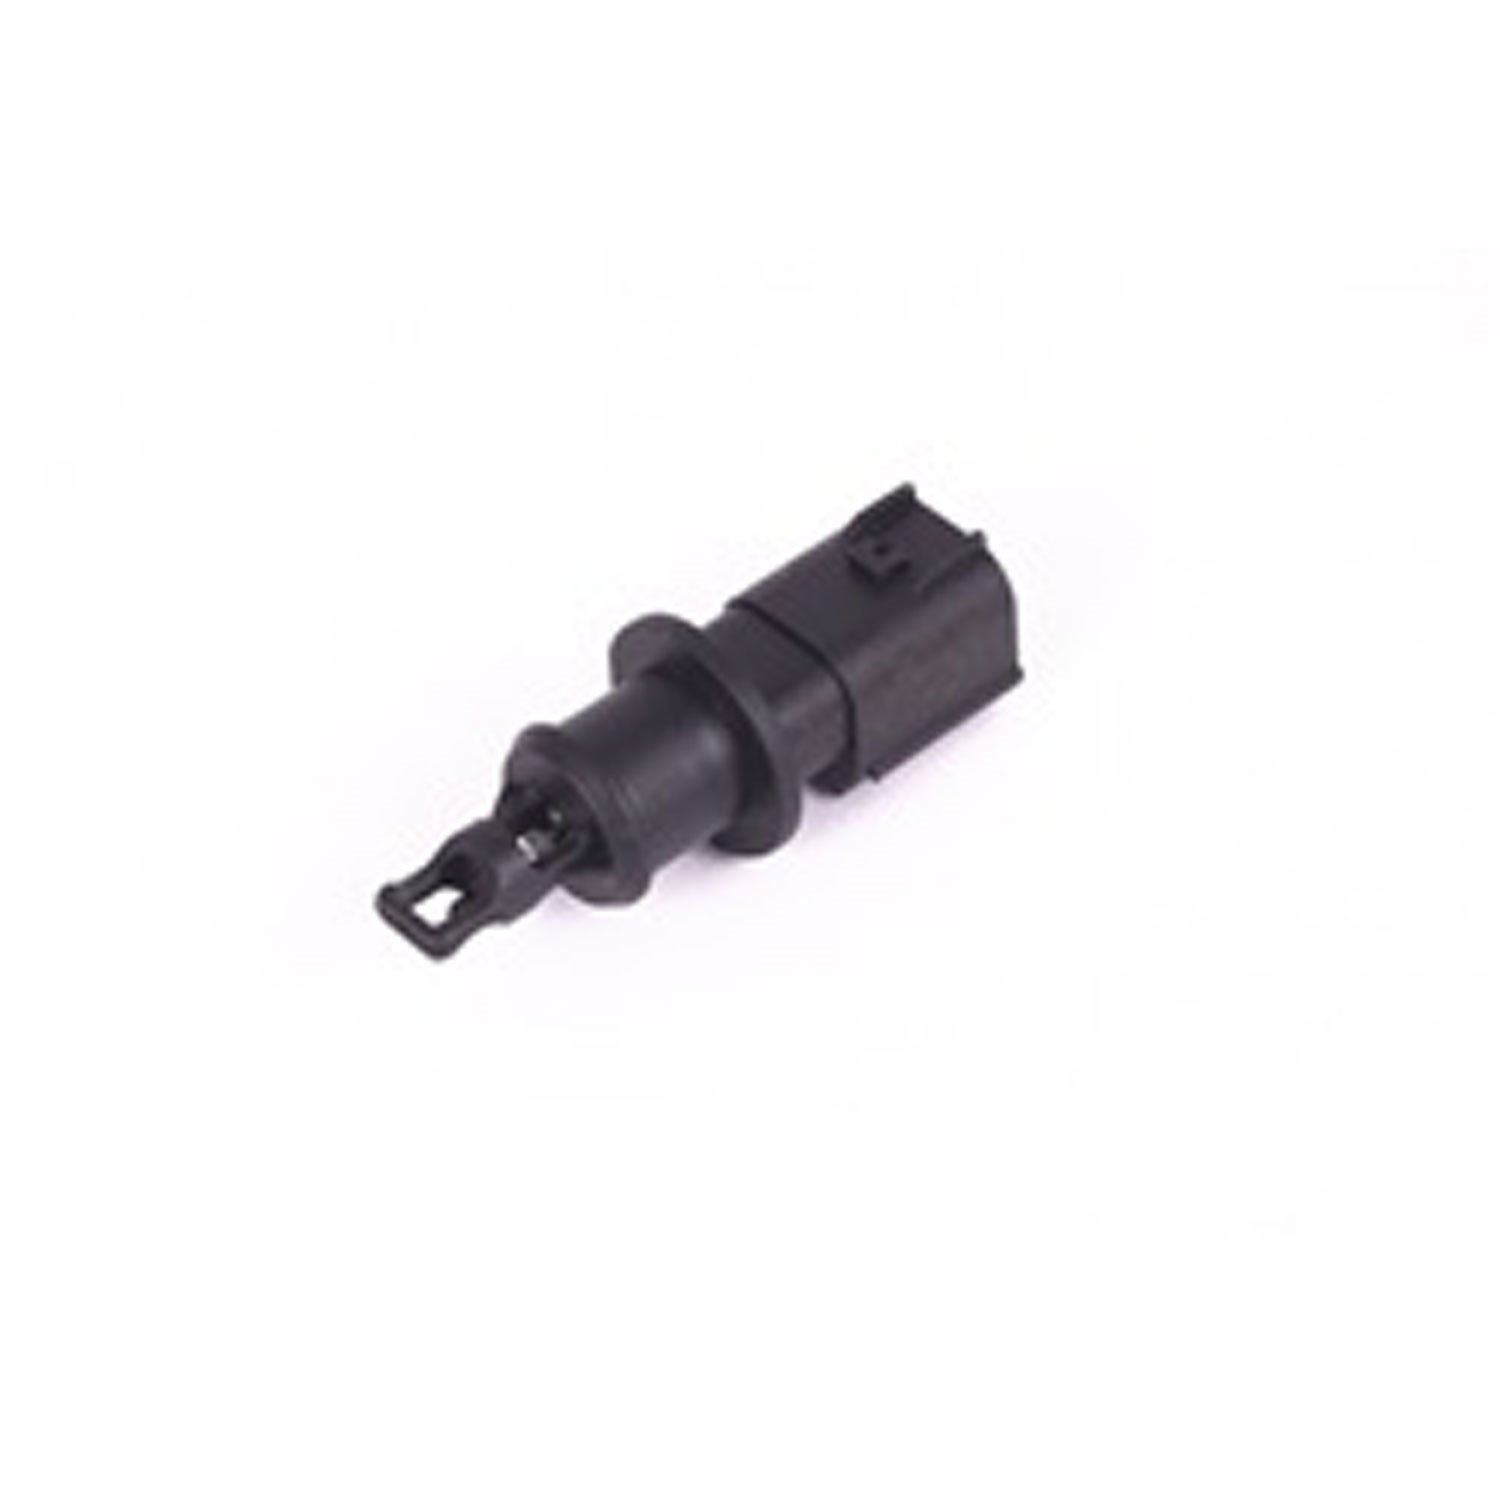 Replacement Intake Temperature Sensor from Omix-ADA, Fits various 04-11 Jeep Models